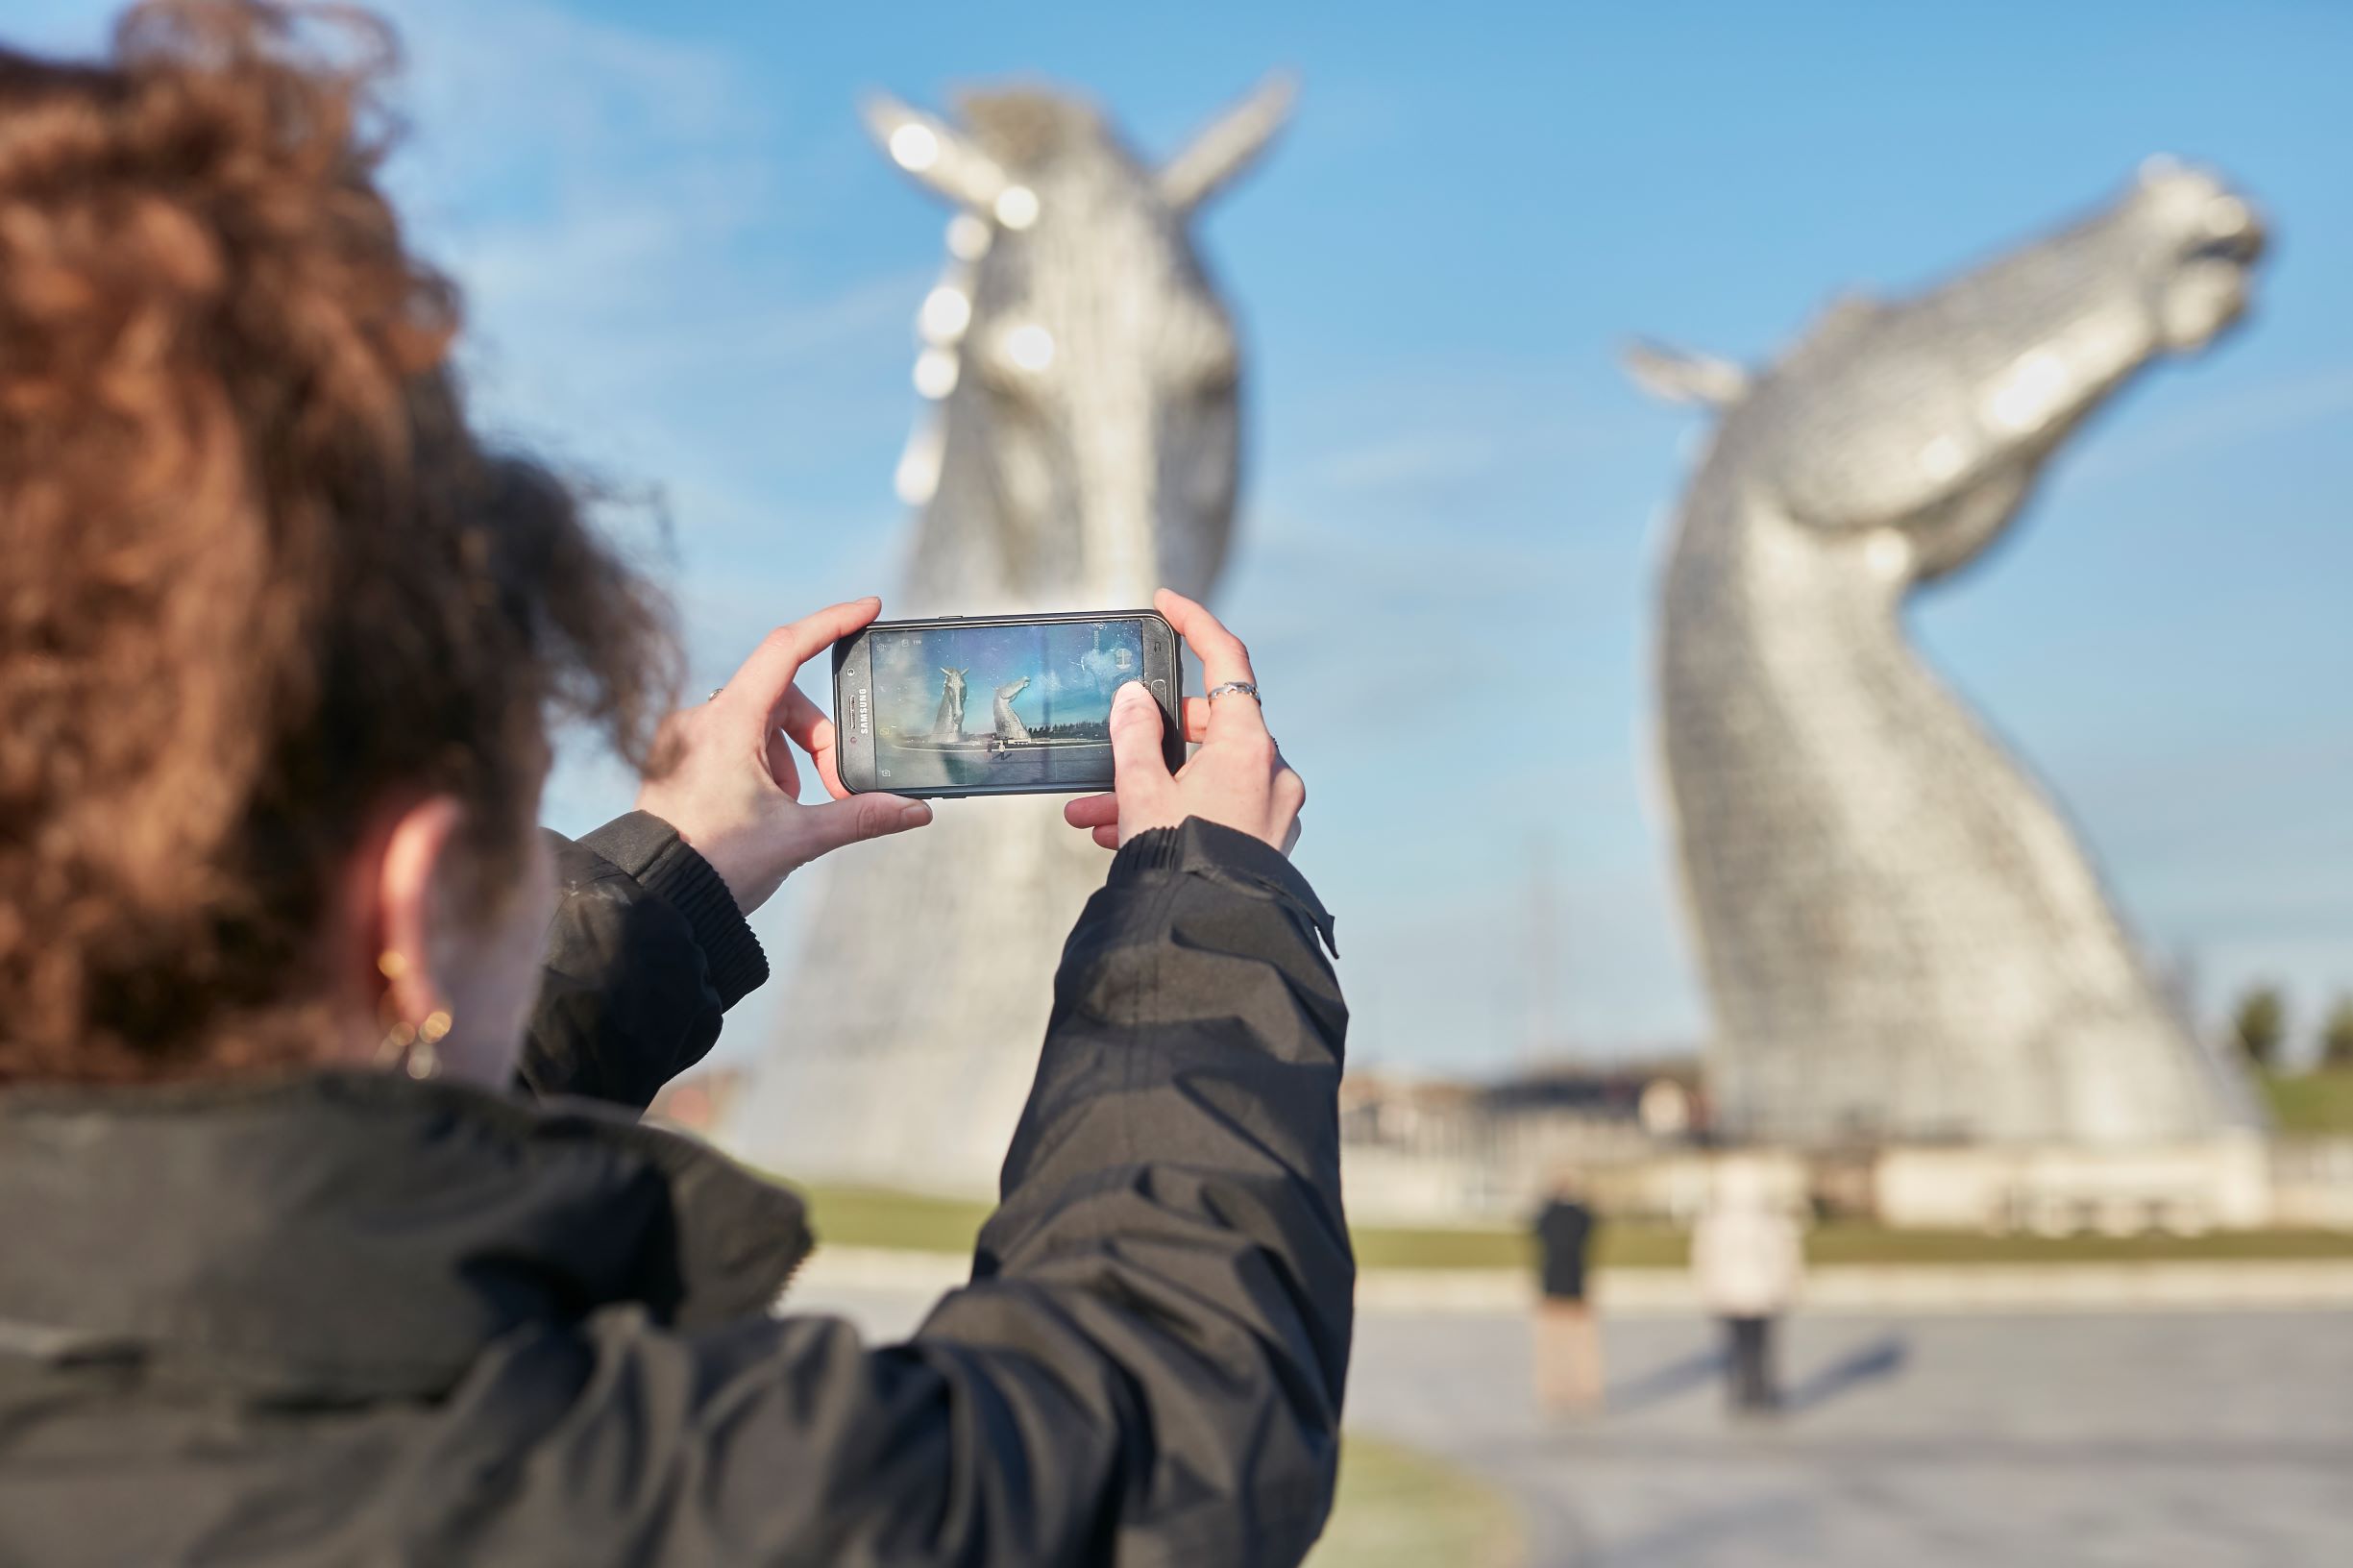 A lady holds a smartphone up to take a photo to two large equine sculptures